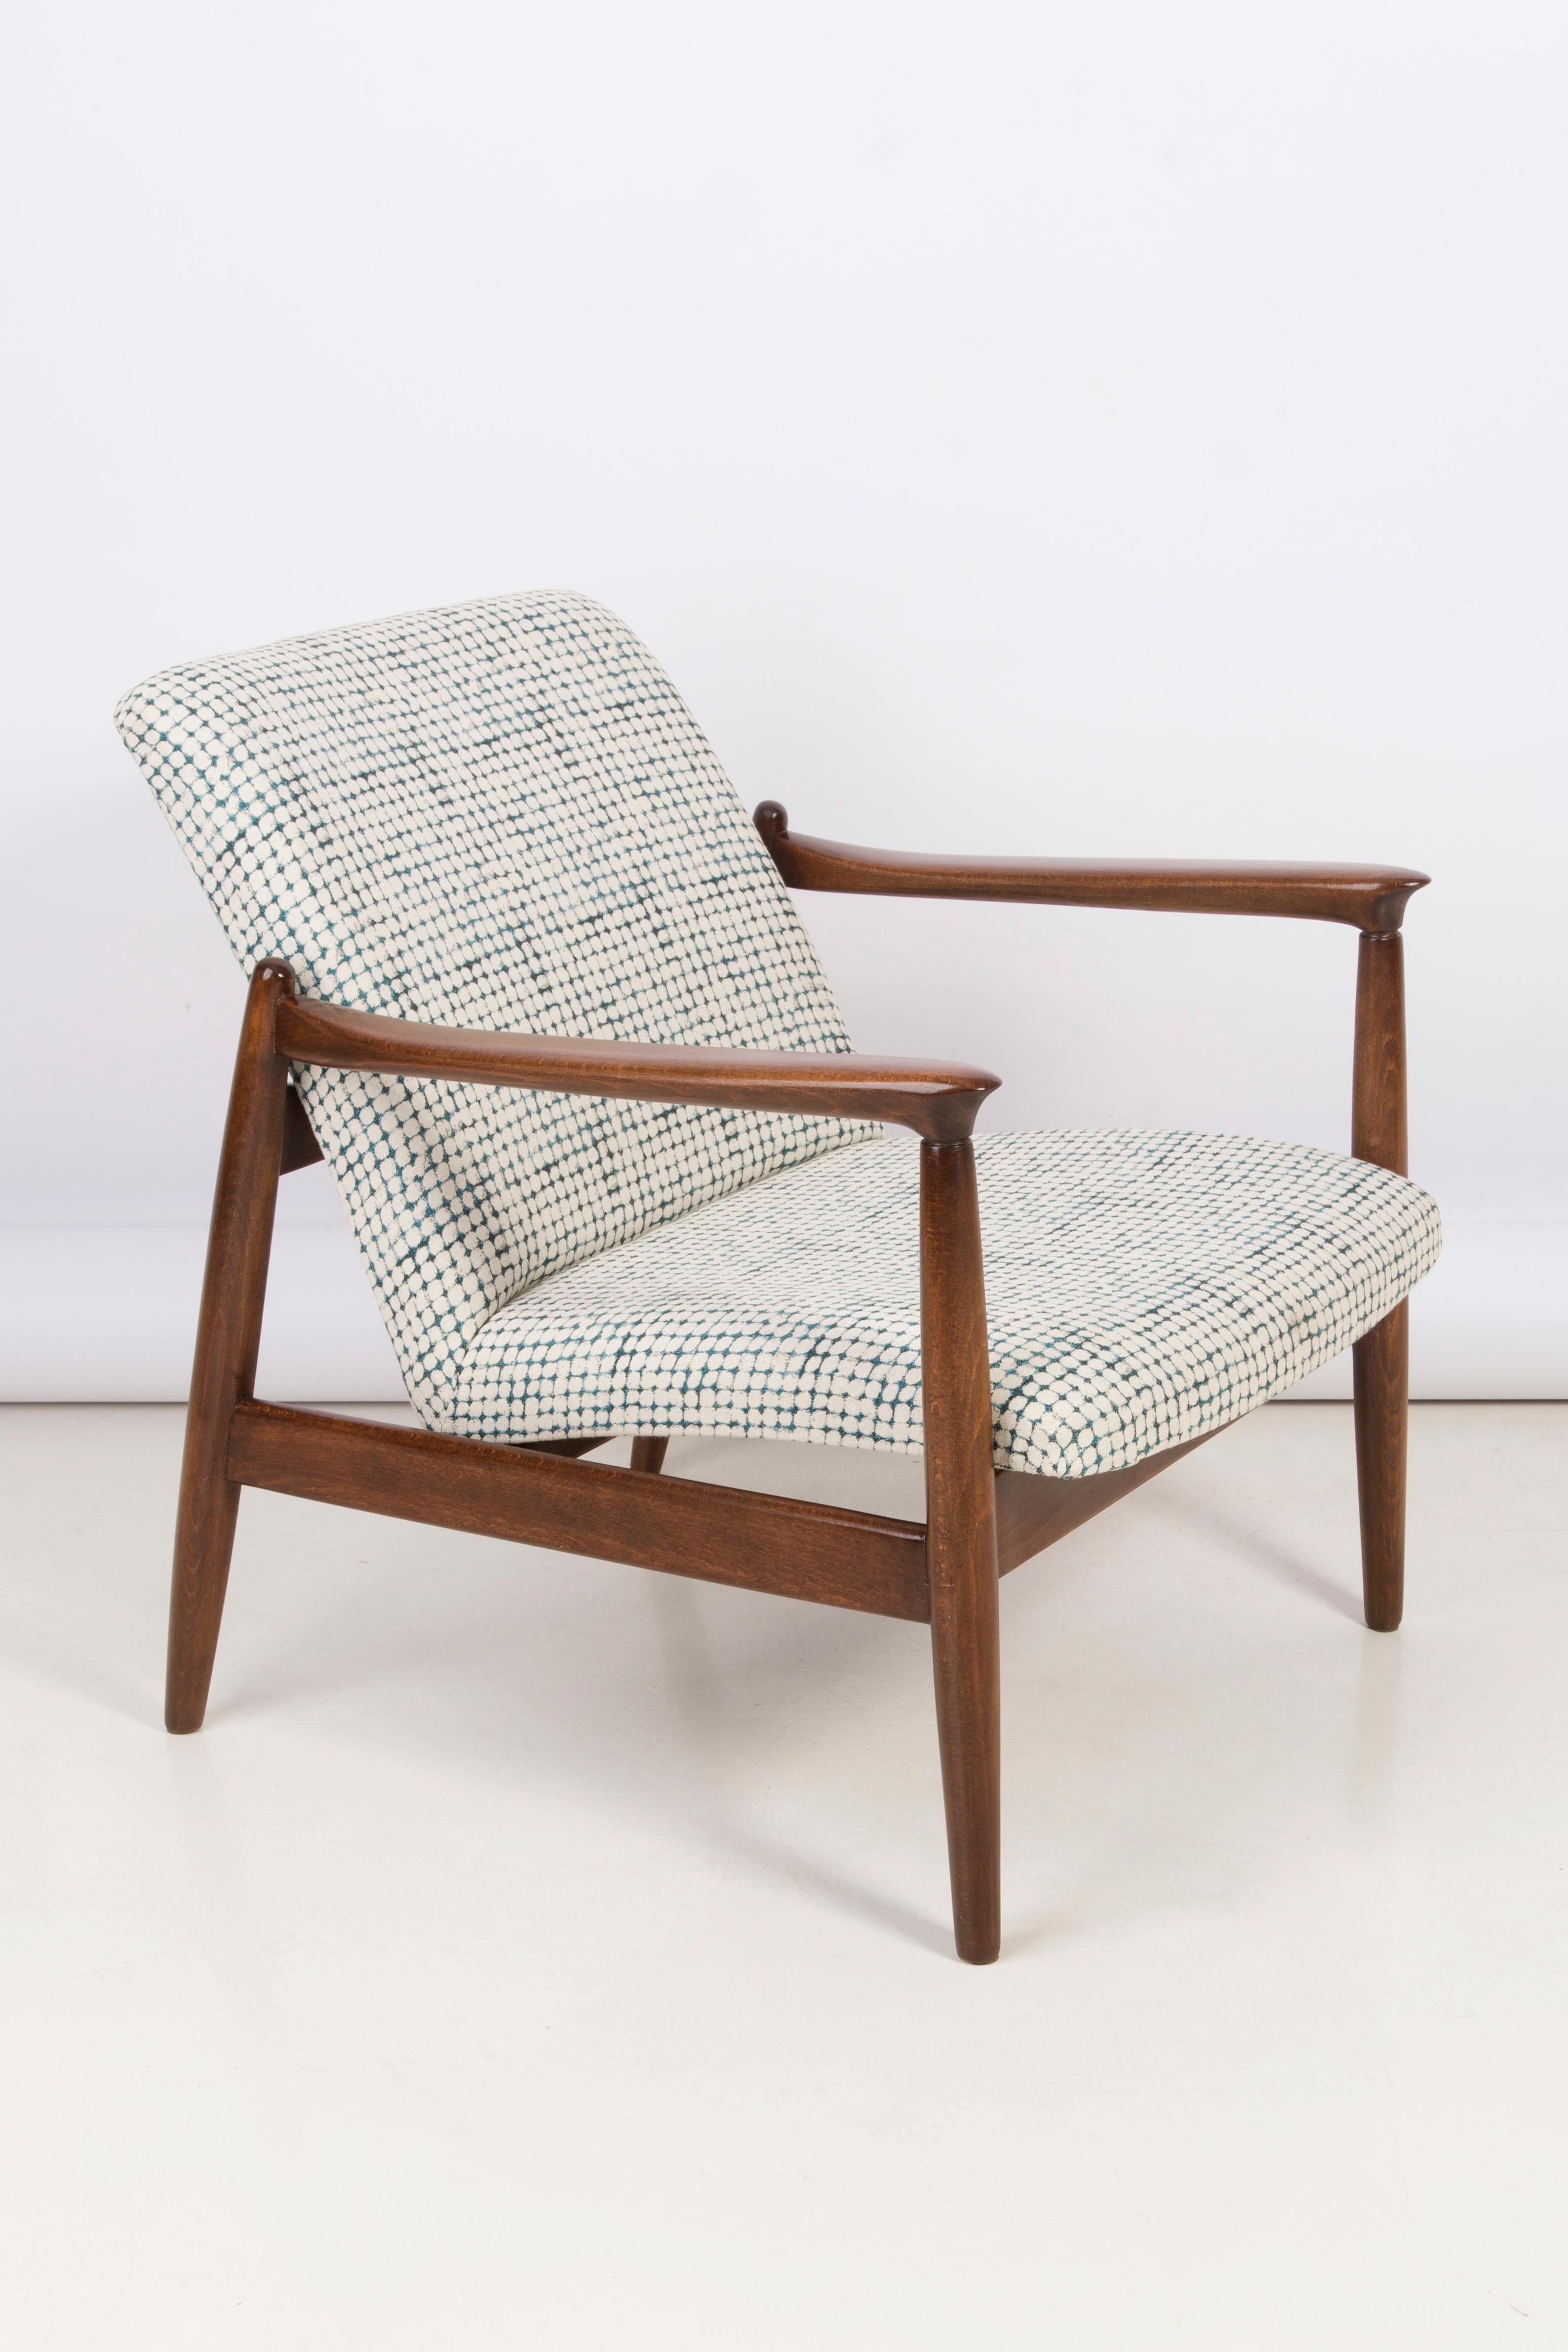 Beautiful armchair and foot stool, designed by Edmund Homa. The armchair was made in the 1960s in the Goscieninska Furniture Factory from solid beechwood. The GFM type armchair is regarded one of the best polish armchair design from the previous